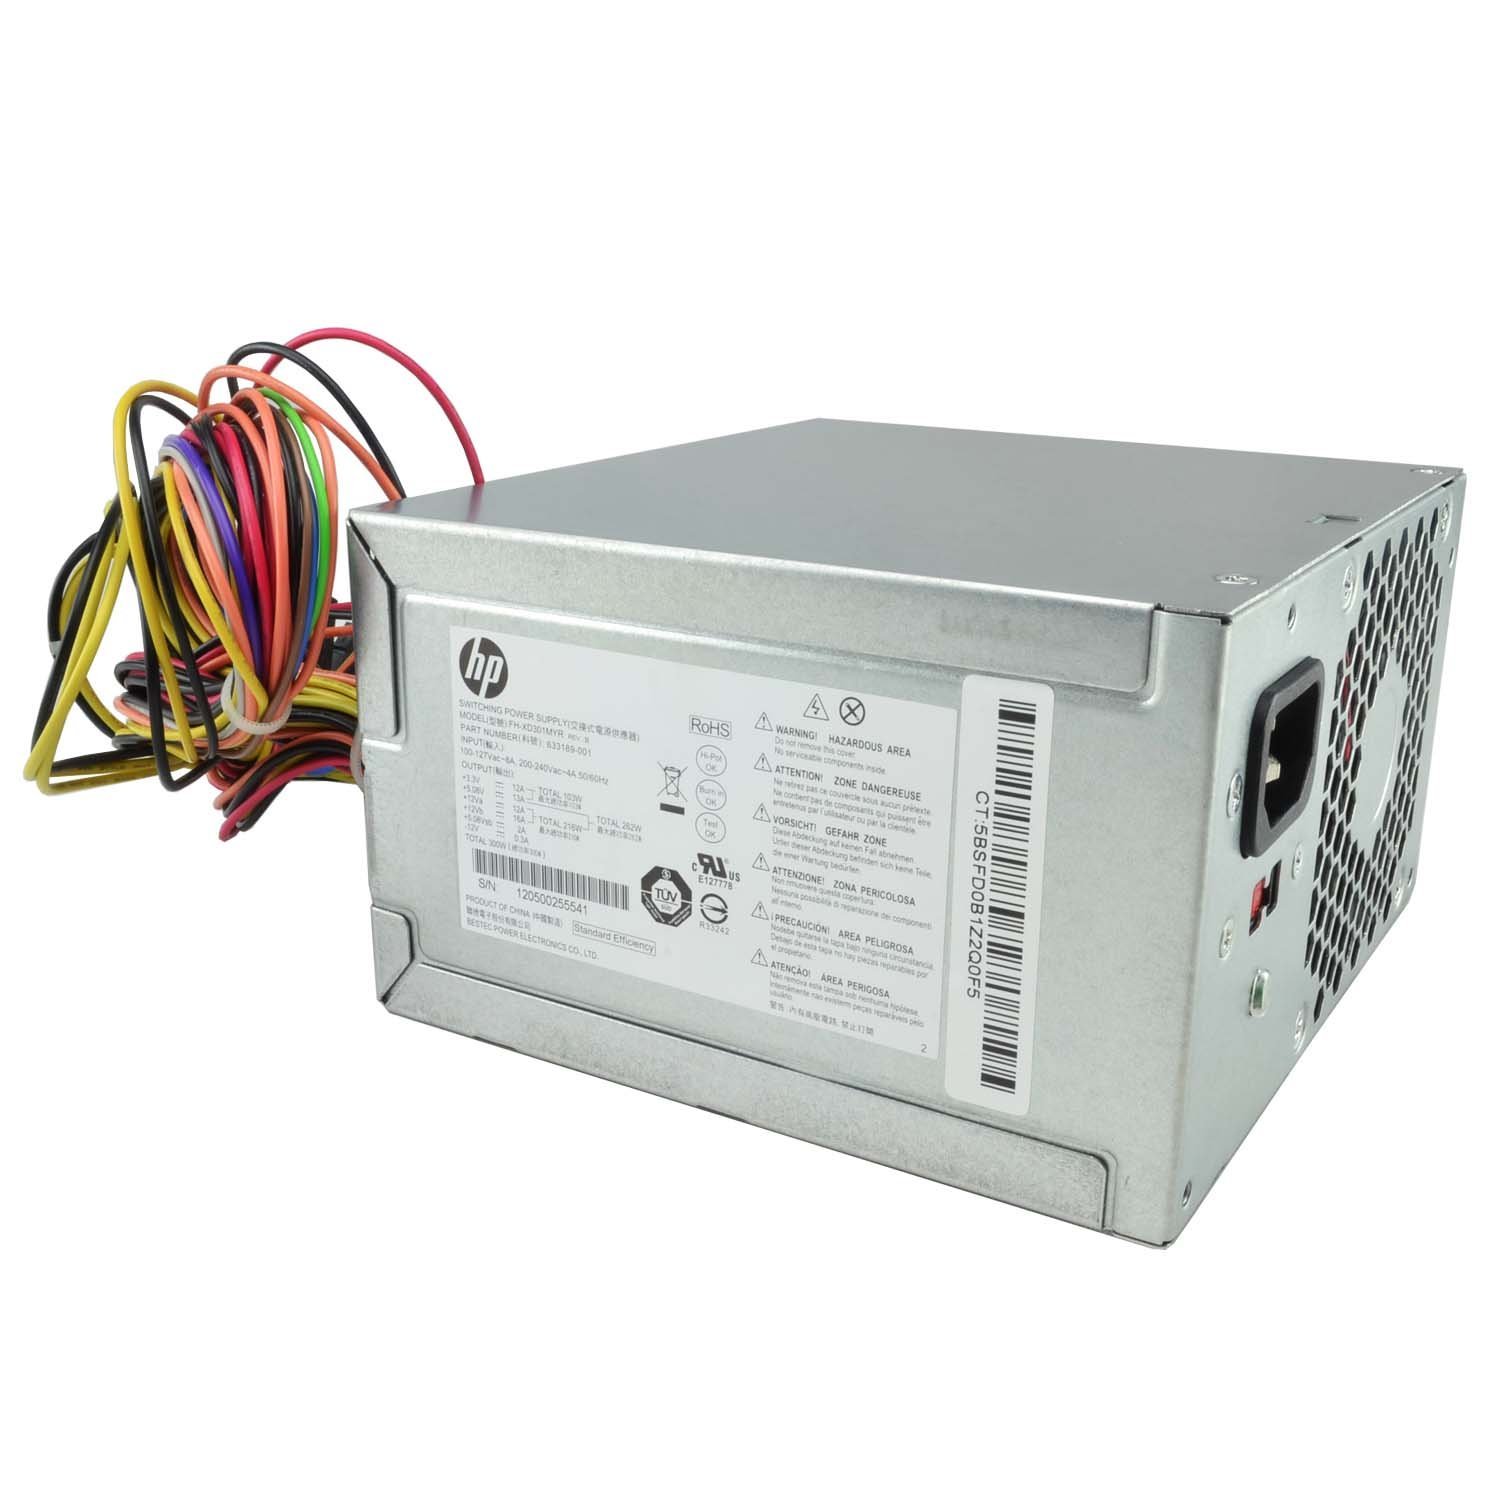 Genuine HP Replacement 300W Power Supply Model: FH-XD301MYR for Lite-On PS-6301-4 P/N:633189-001